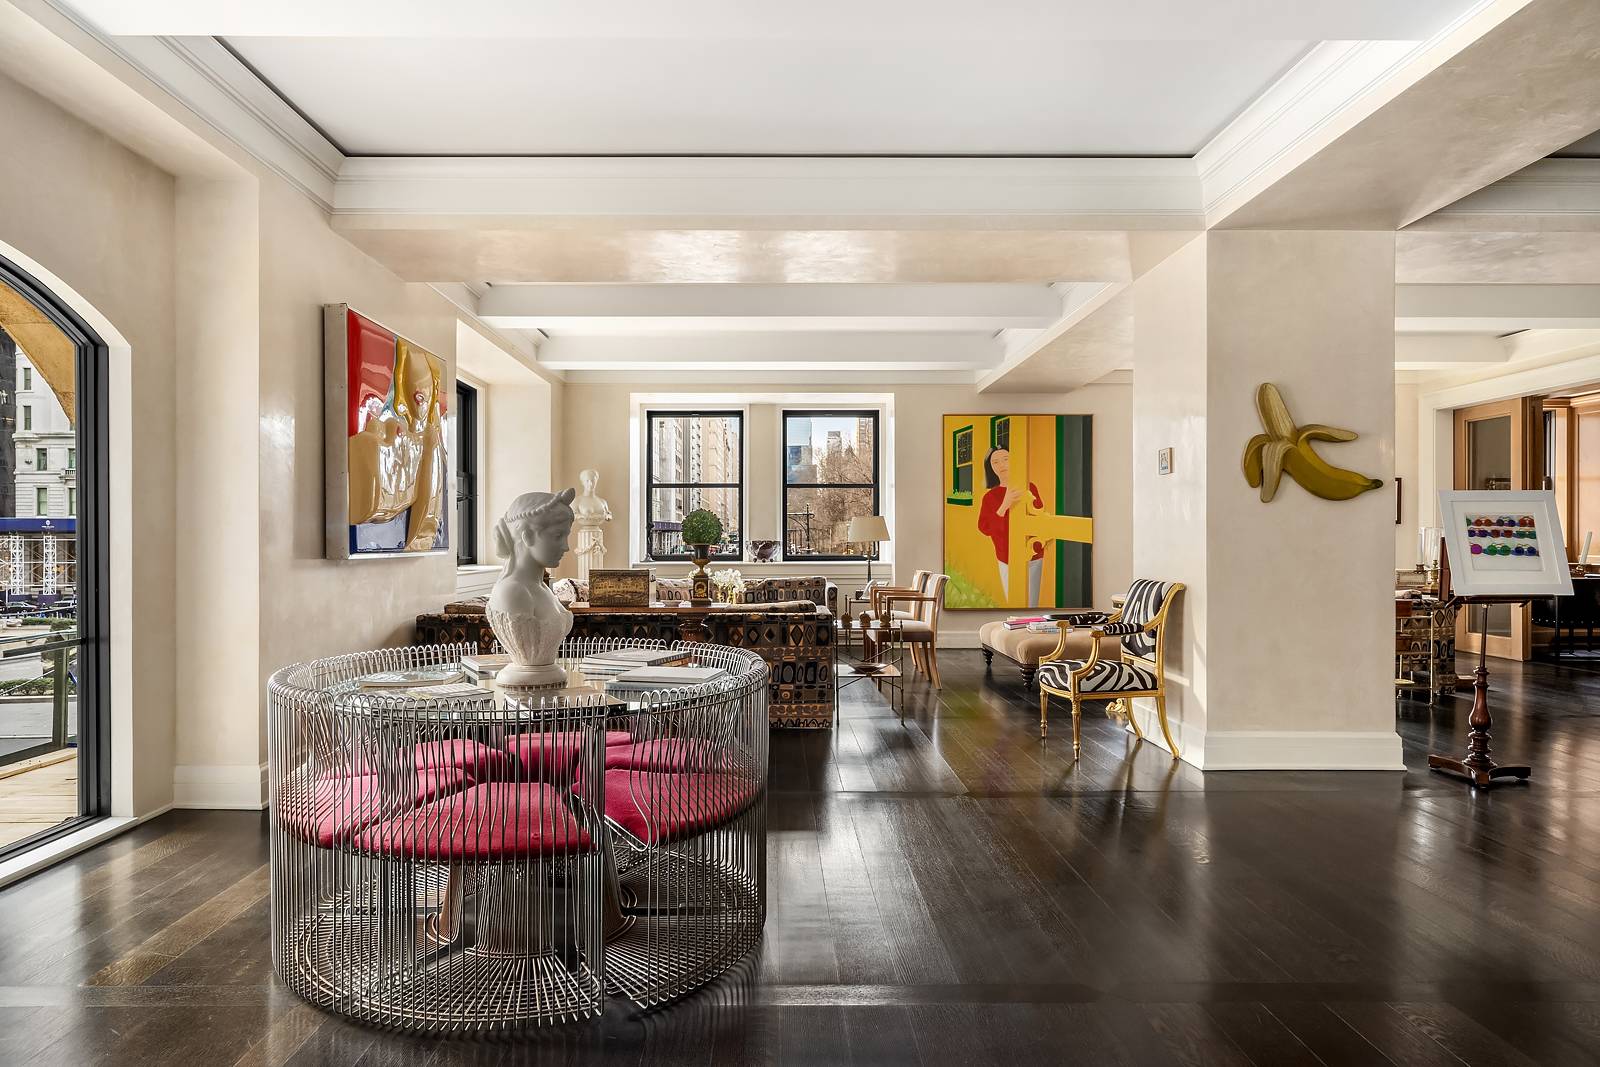 Occupying a full floor at the legendary Sherry Netherland, this 9, 000 square foot, 19 room uptown loft, designed by famed designer Mica Ertegun, is truly one of the most ...